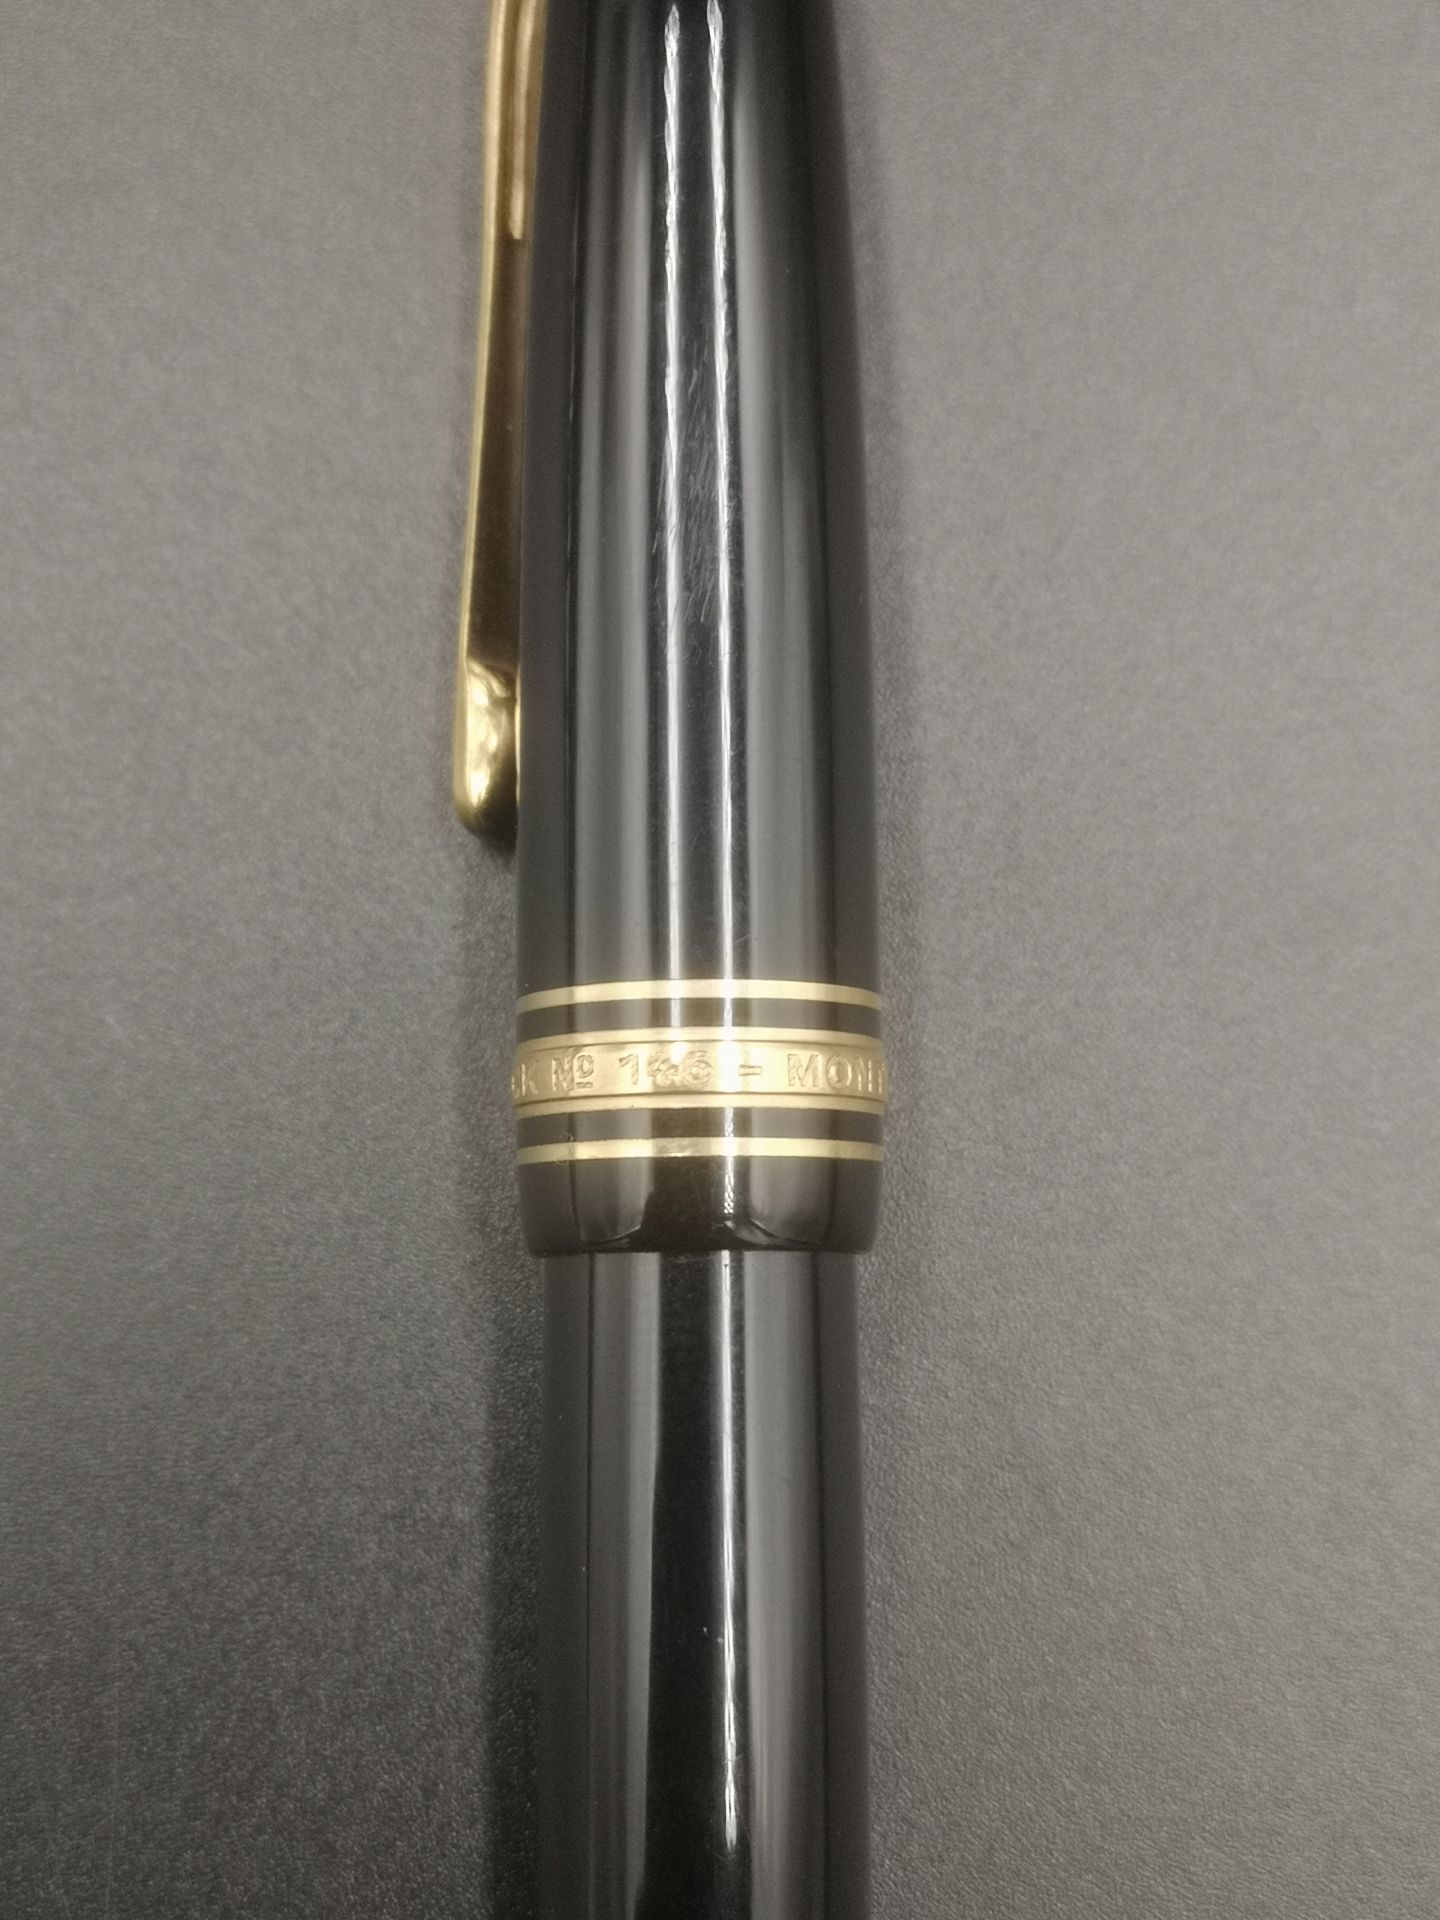 Montblanc Meisterstuck fountain pen - Image 4 of 6